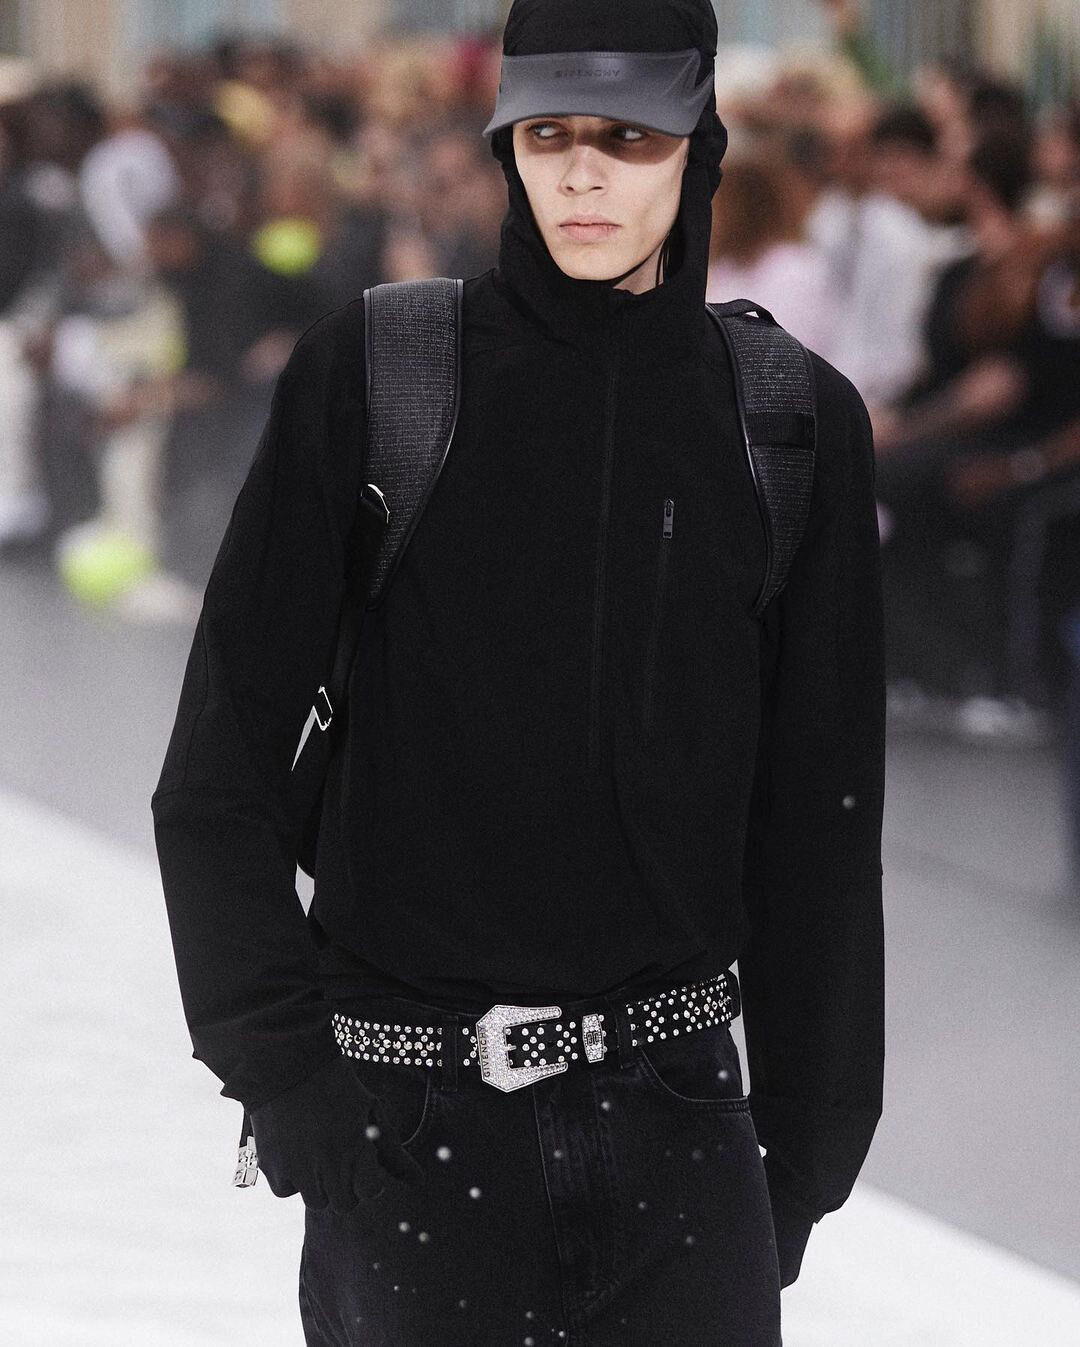 GIVENCHY SPRING SUMMER 2023 COLLEZIONE READY-TO-WEAR UOMO